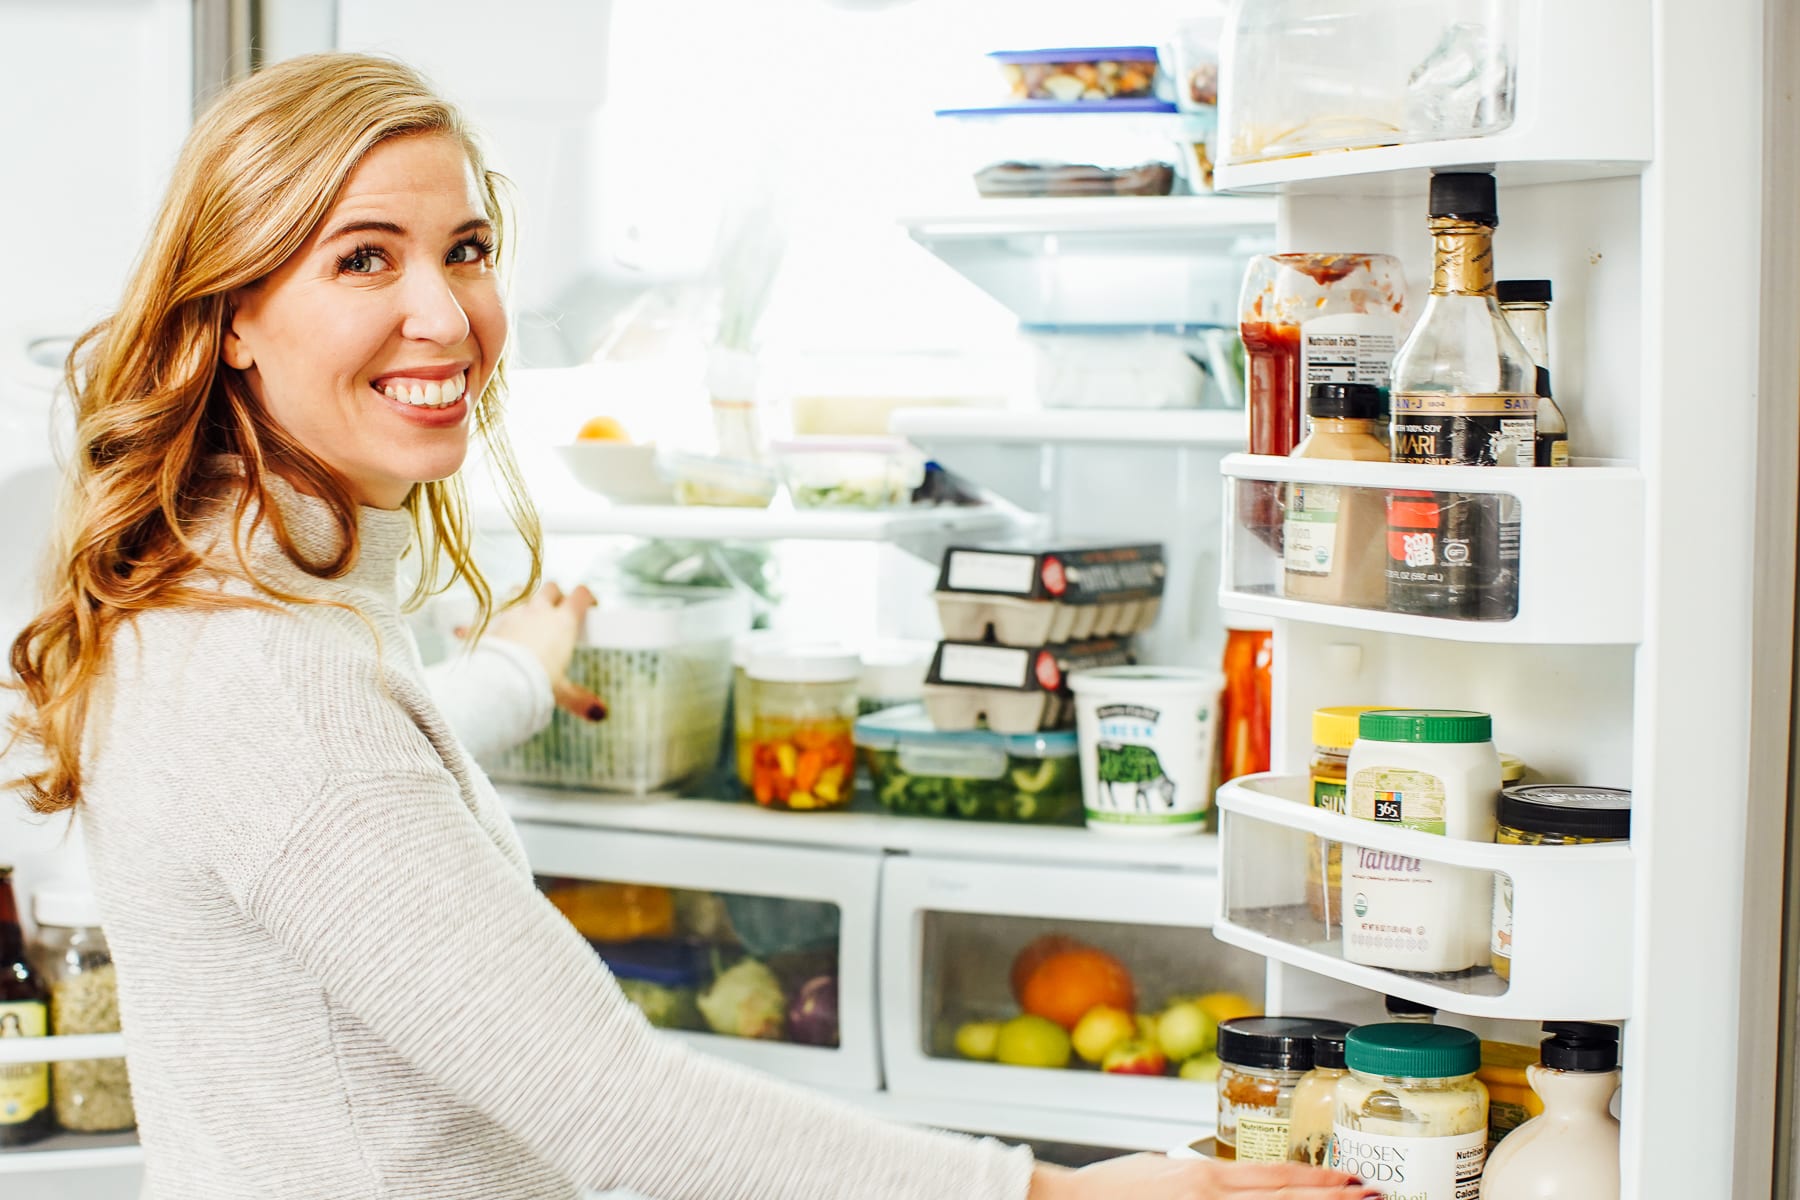 Real food tour: Food Storage Tips, Organization, and Storage Containers